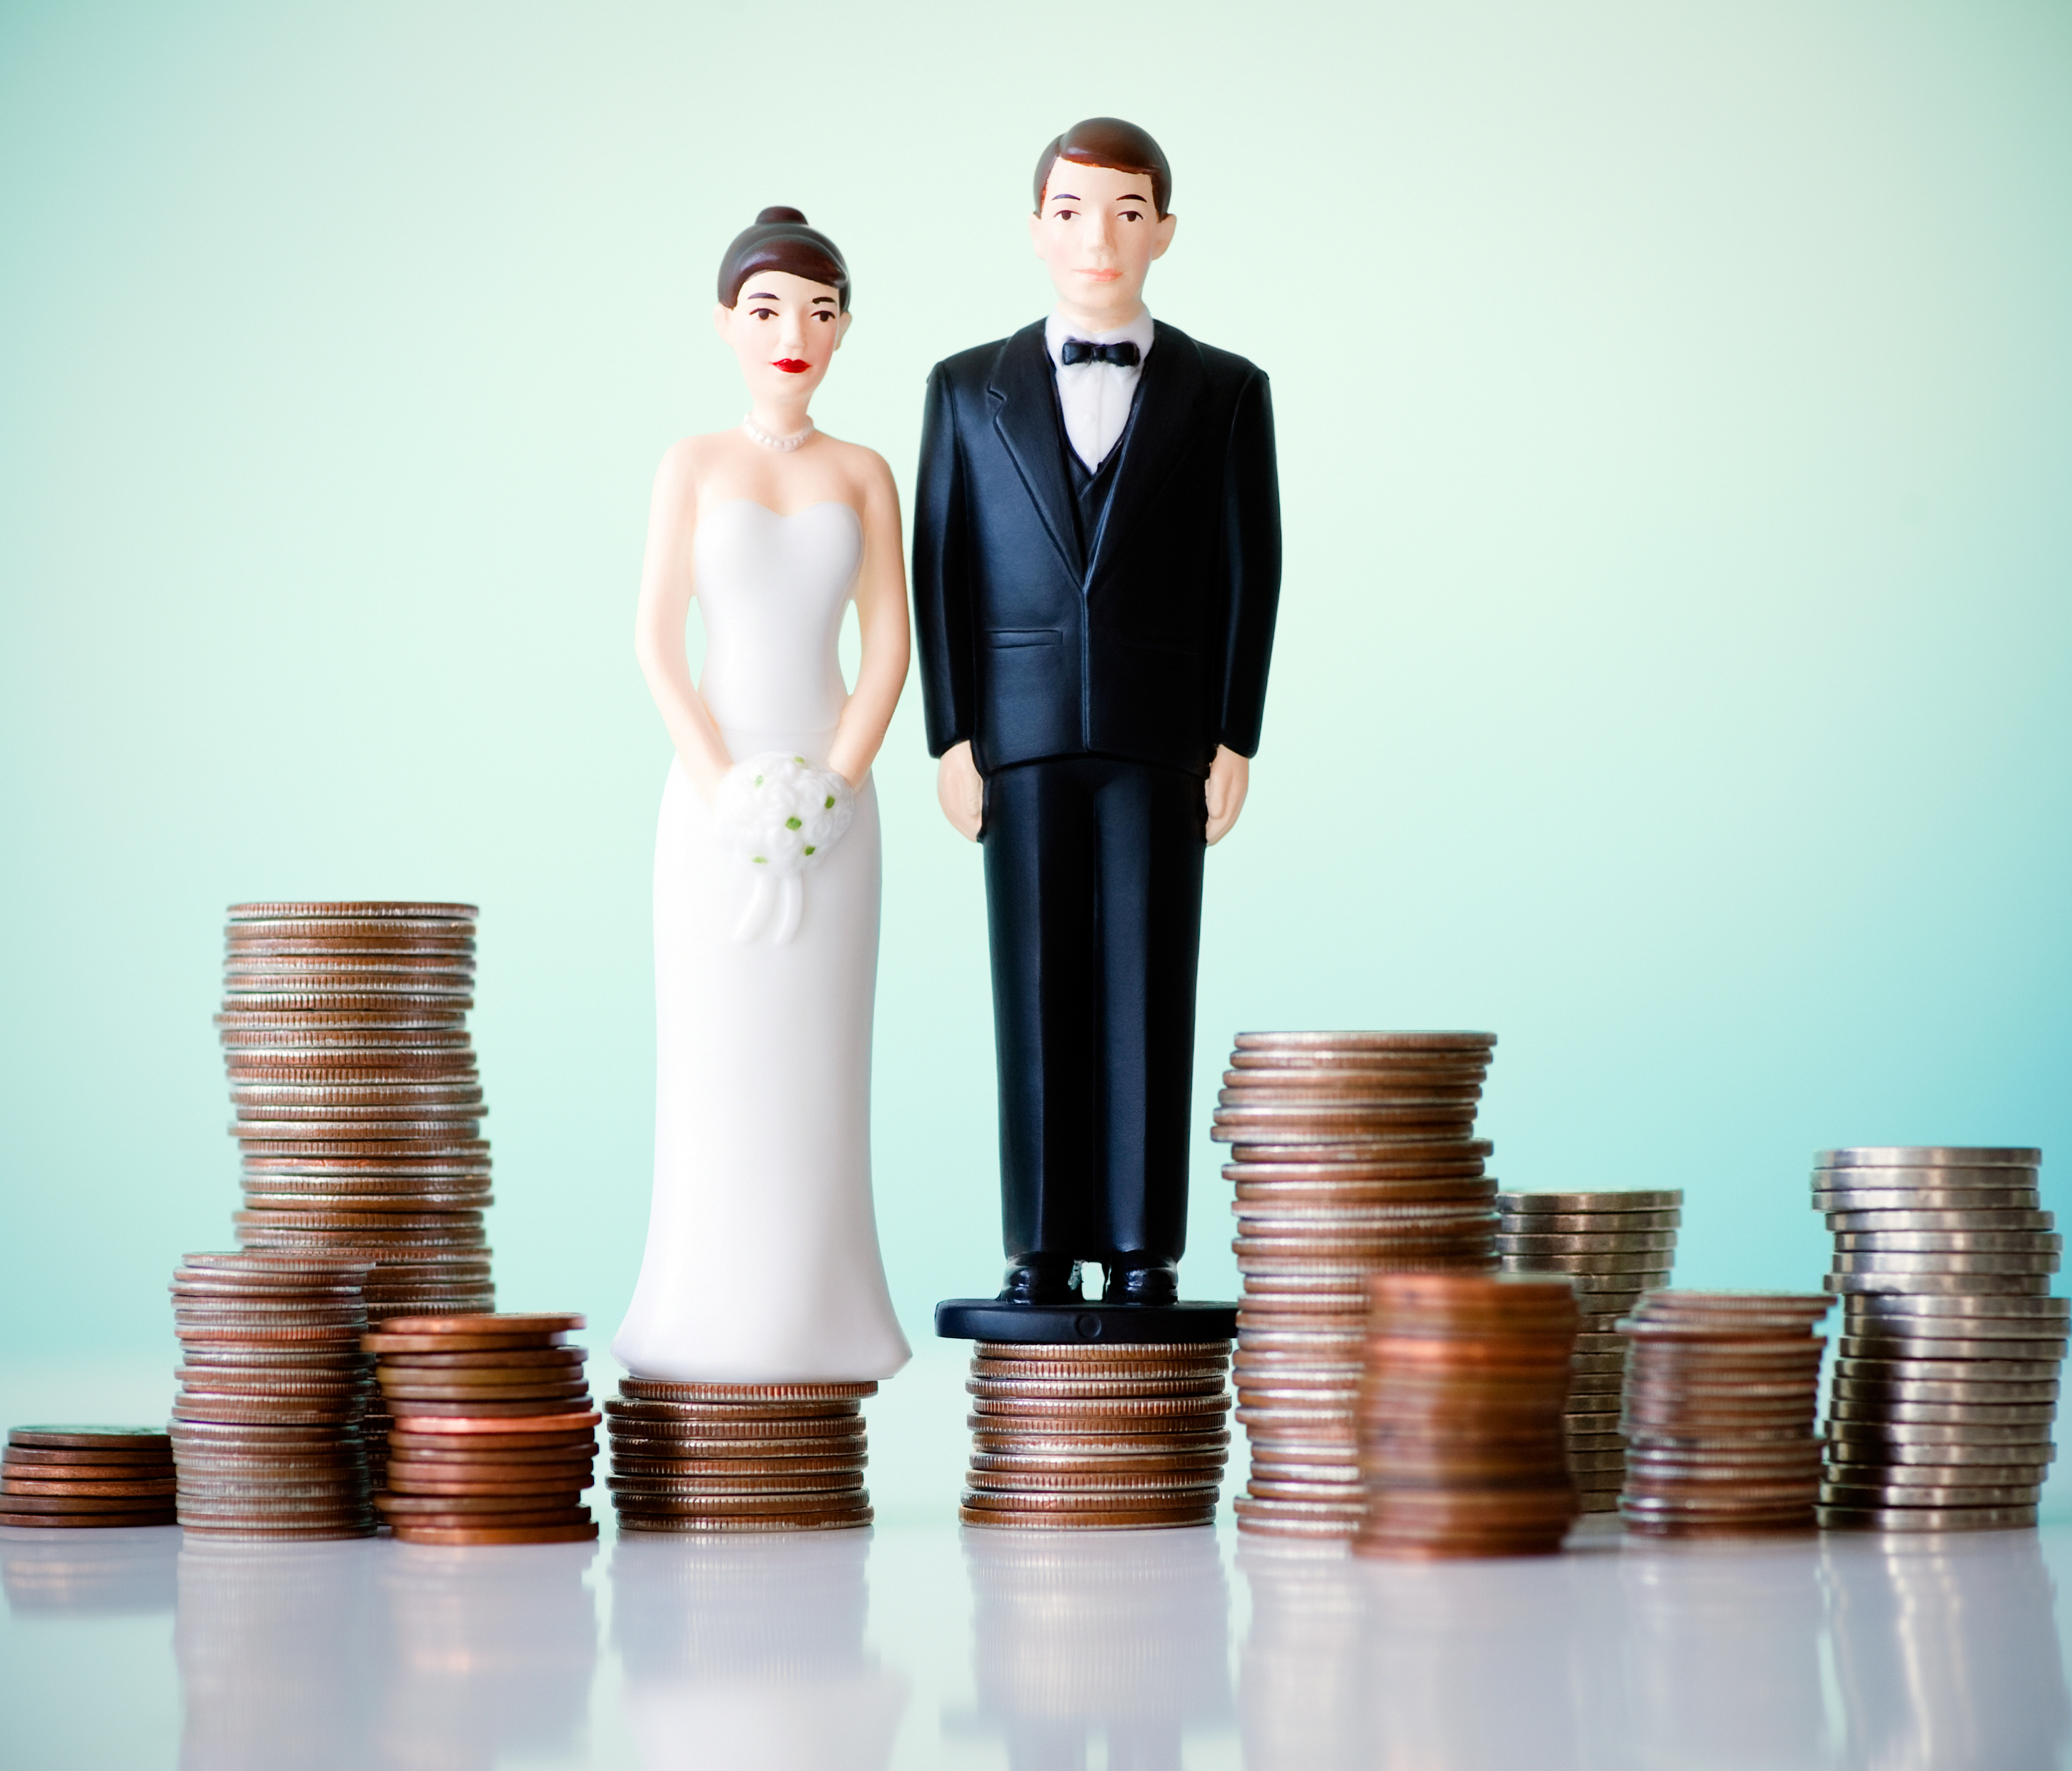 Wife Bonus Evening Income Disparity in Relationships the Wrong Way Money